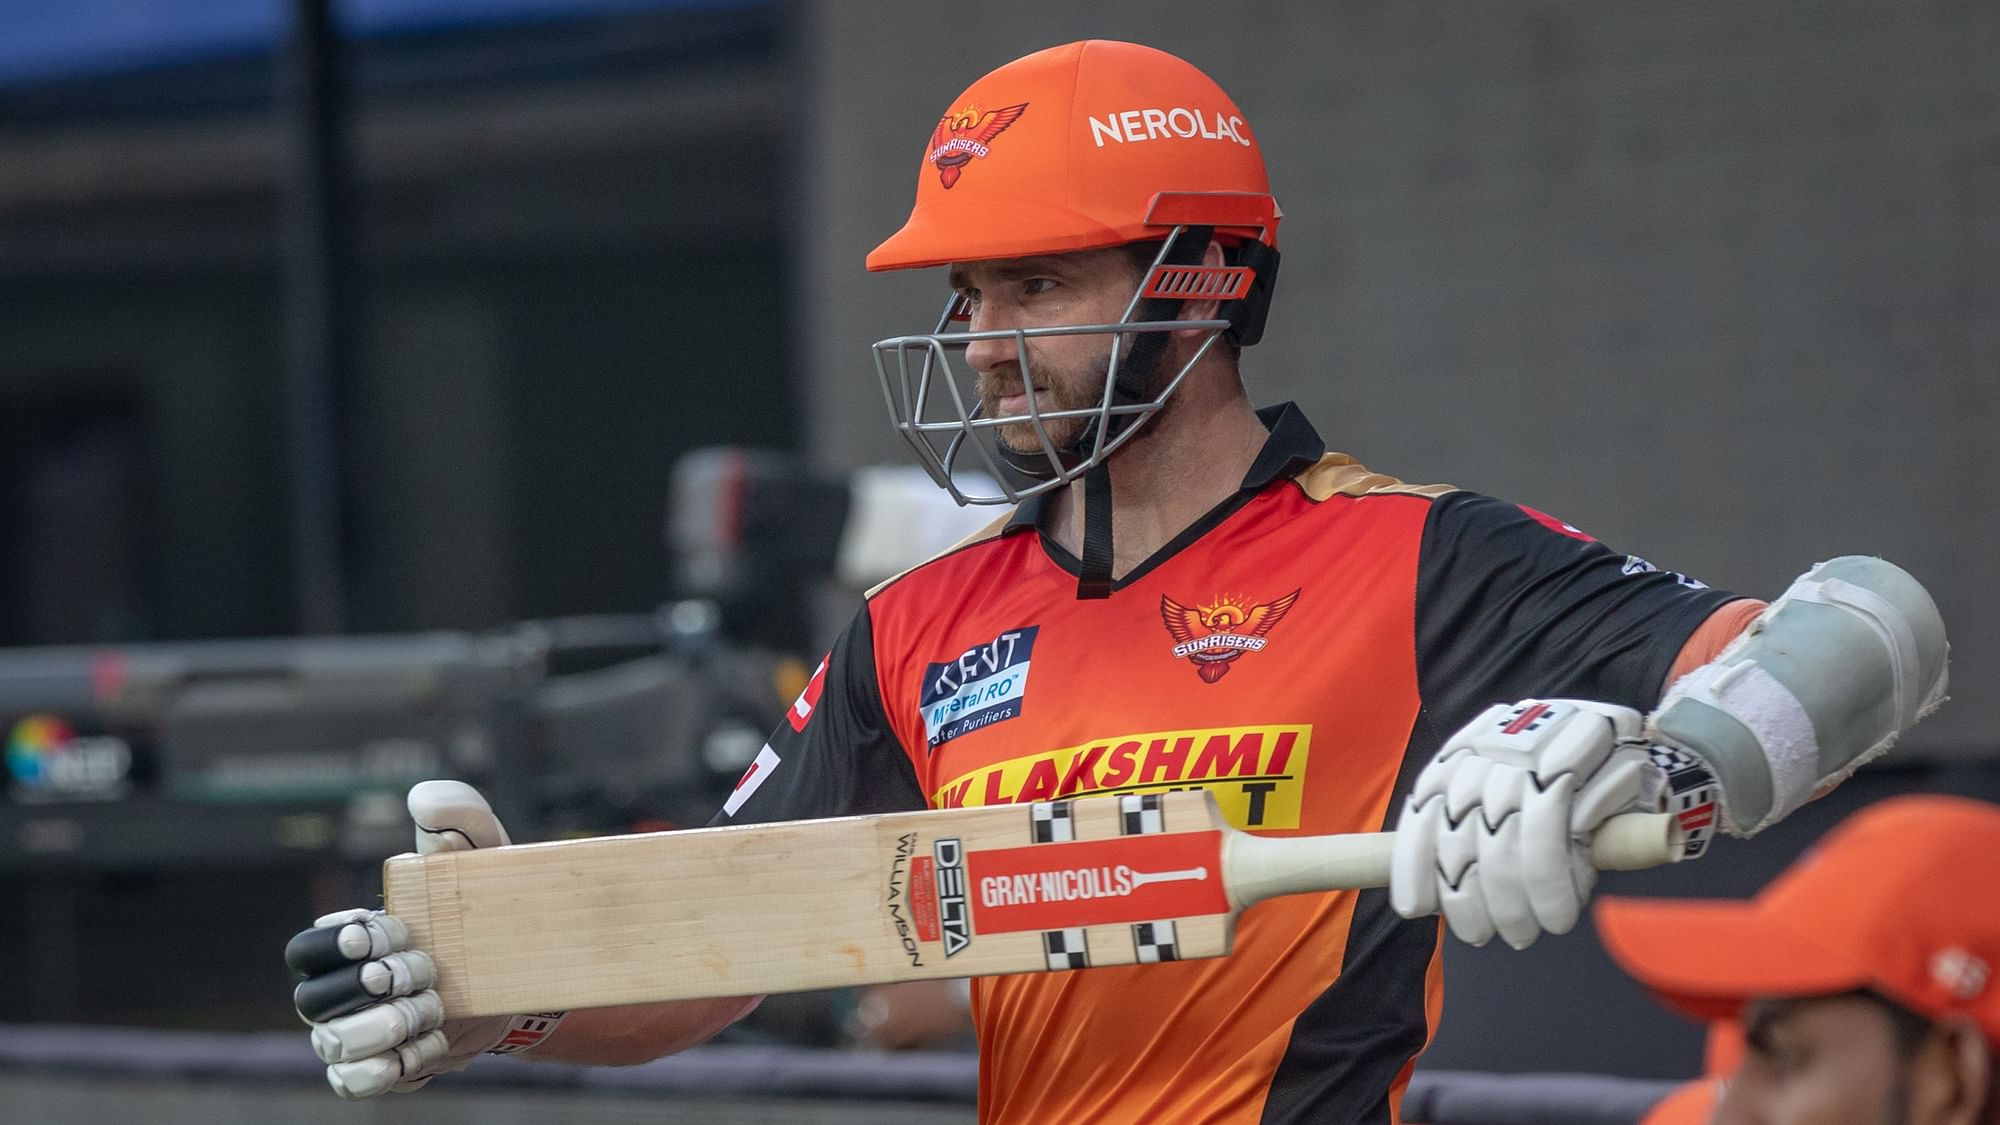 Kane Williamson played his first IPL 2021 match on Wednesday, against Punjab Kings.